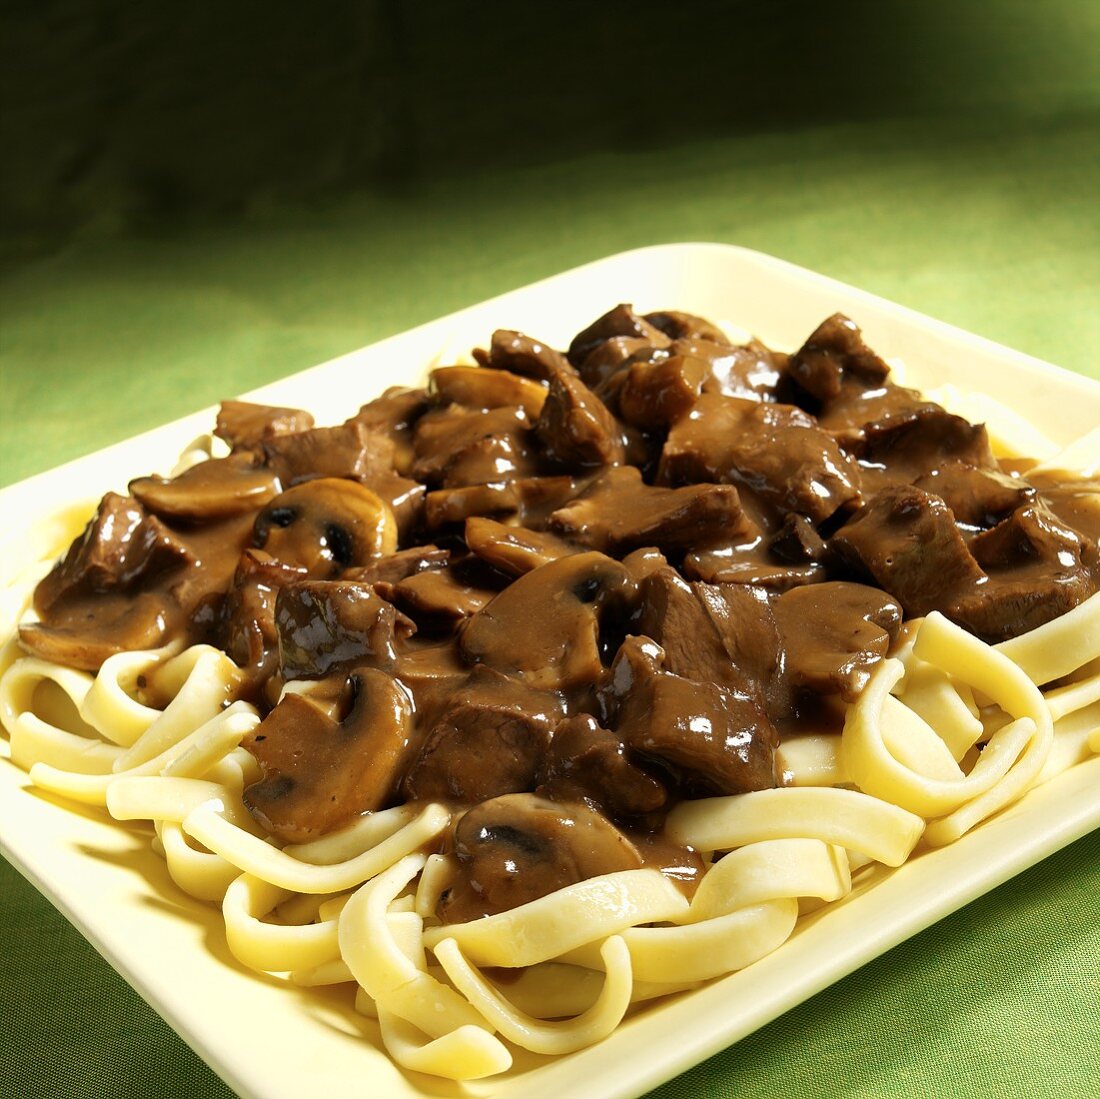 Beef ragout with mushrooms on ribbon pasta